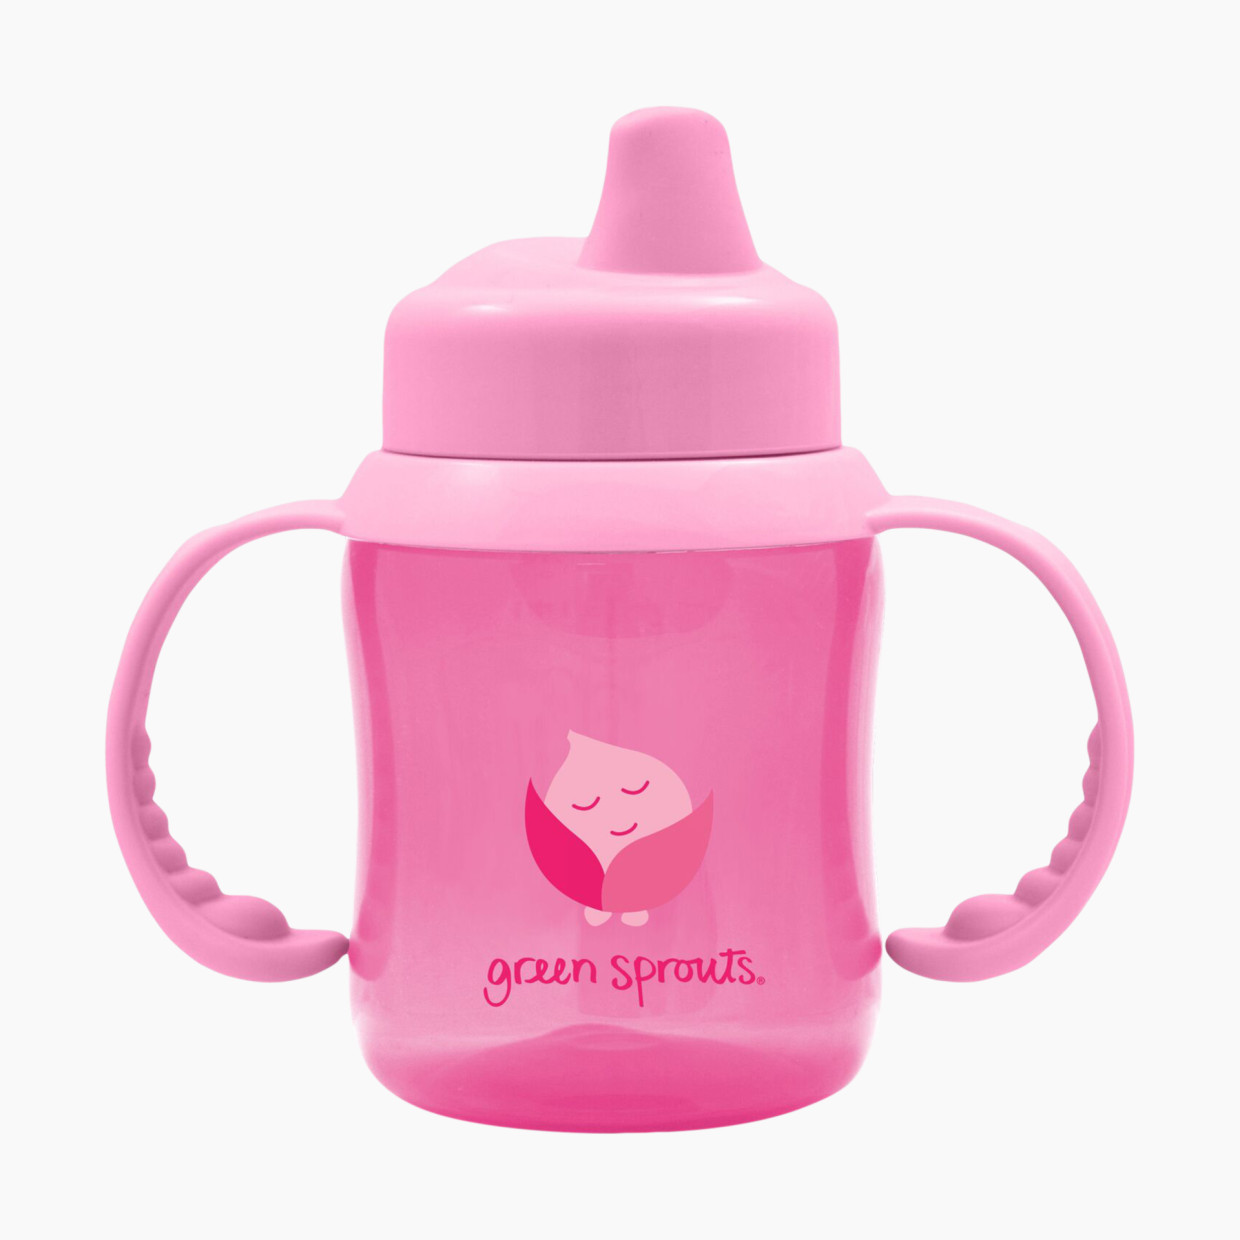 GREEN SPROUTS Non-Spill Sippy Cup - Pink.